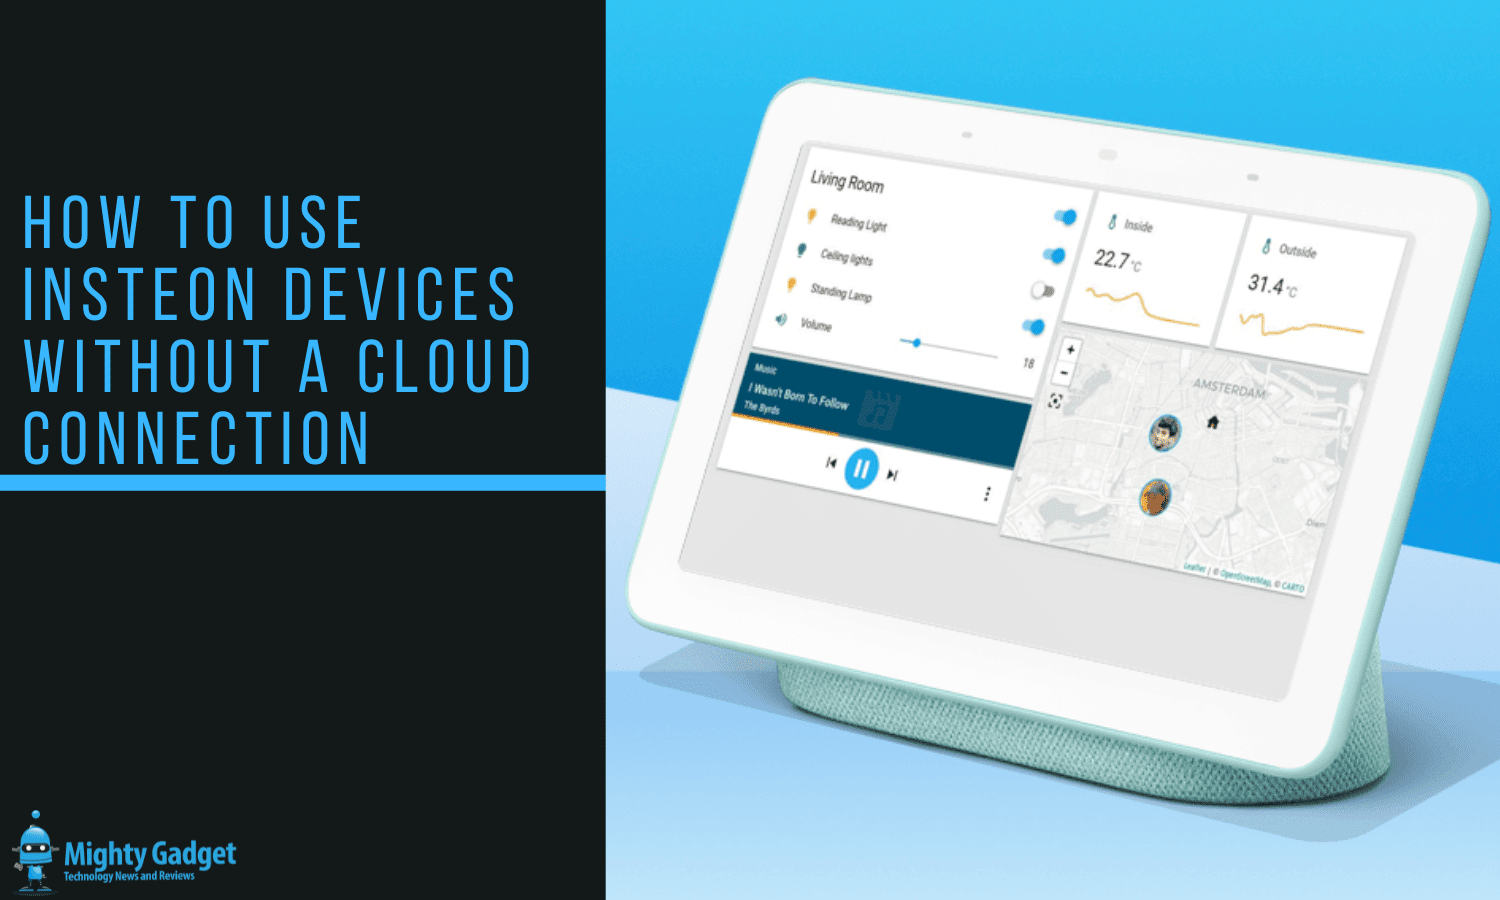 How to use Insteon devices without a cloud connection – Set up Home Assistant on Windows